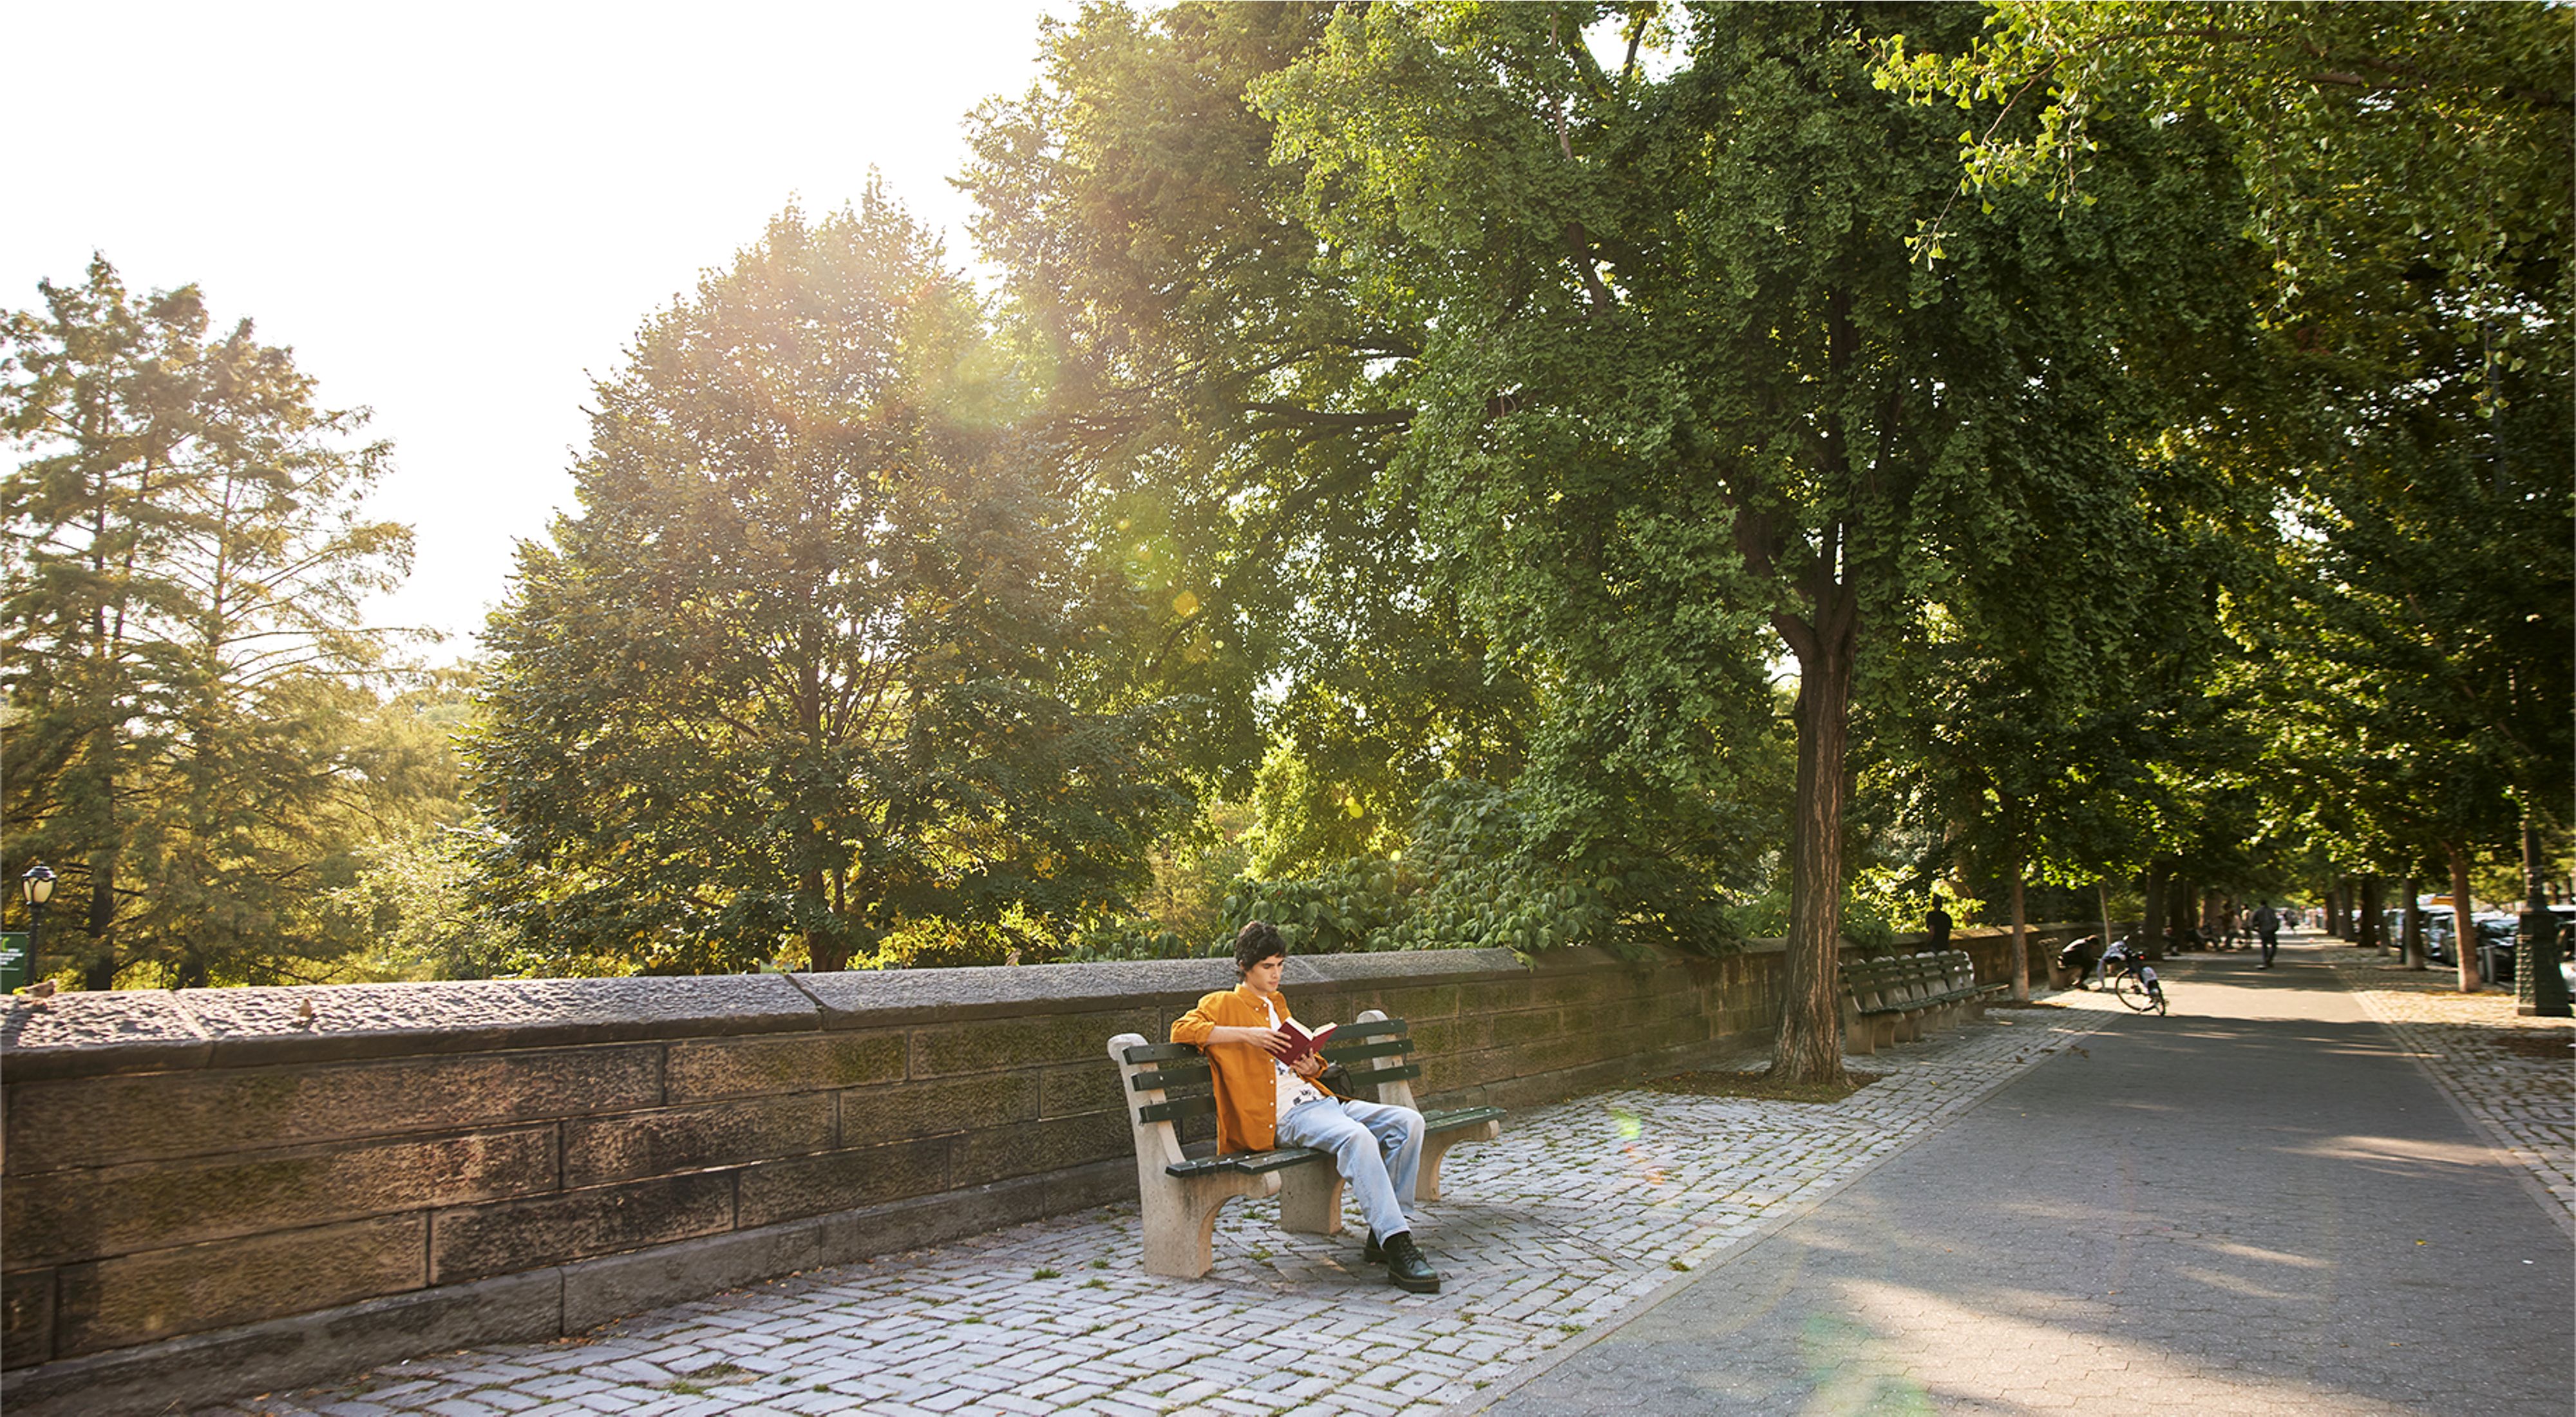 A person sitting on a bench reading a book with trees in the background.